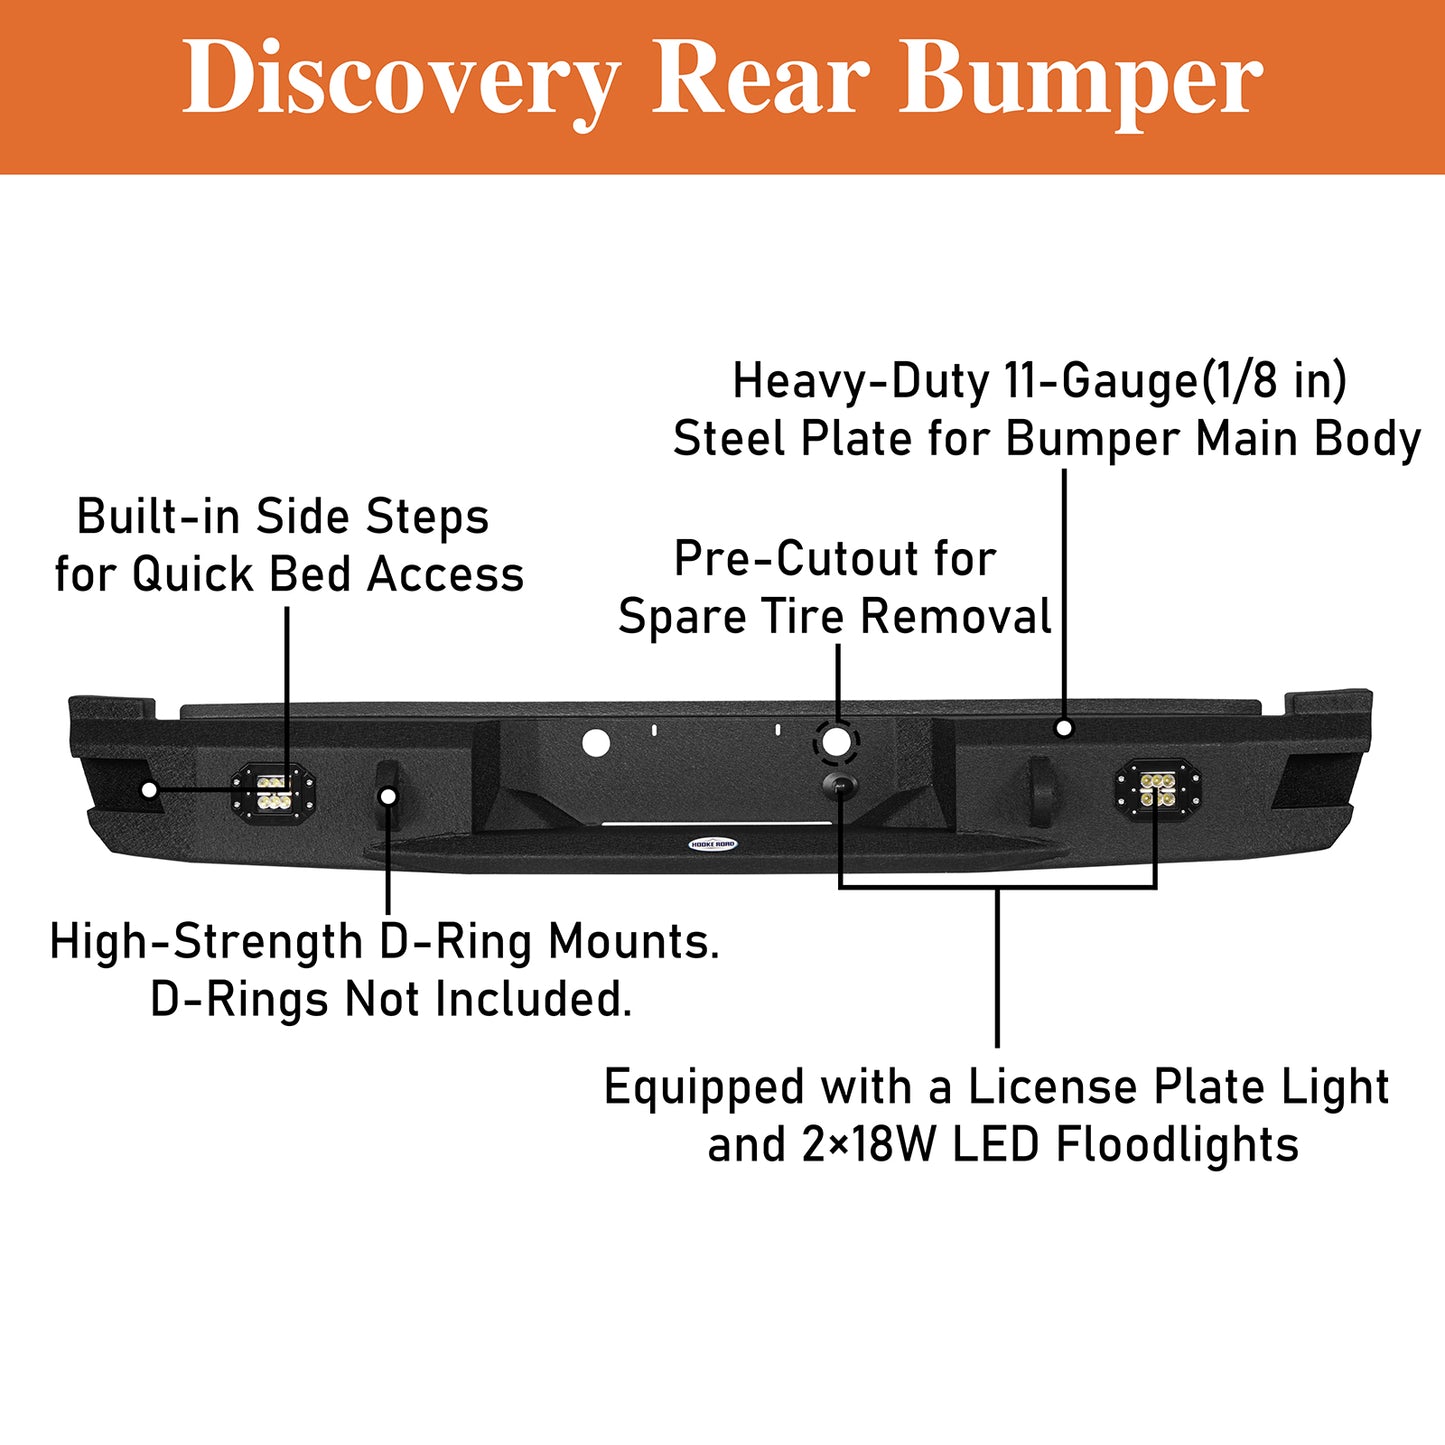 2011-2016 Ford F-250 Aftermarket Rear Bumper Discovery - Ultralisk 4x4  ULB.85239